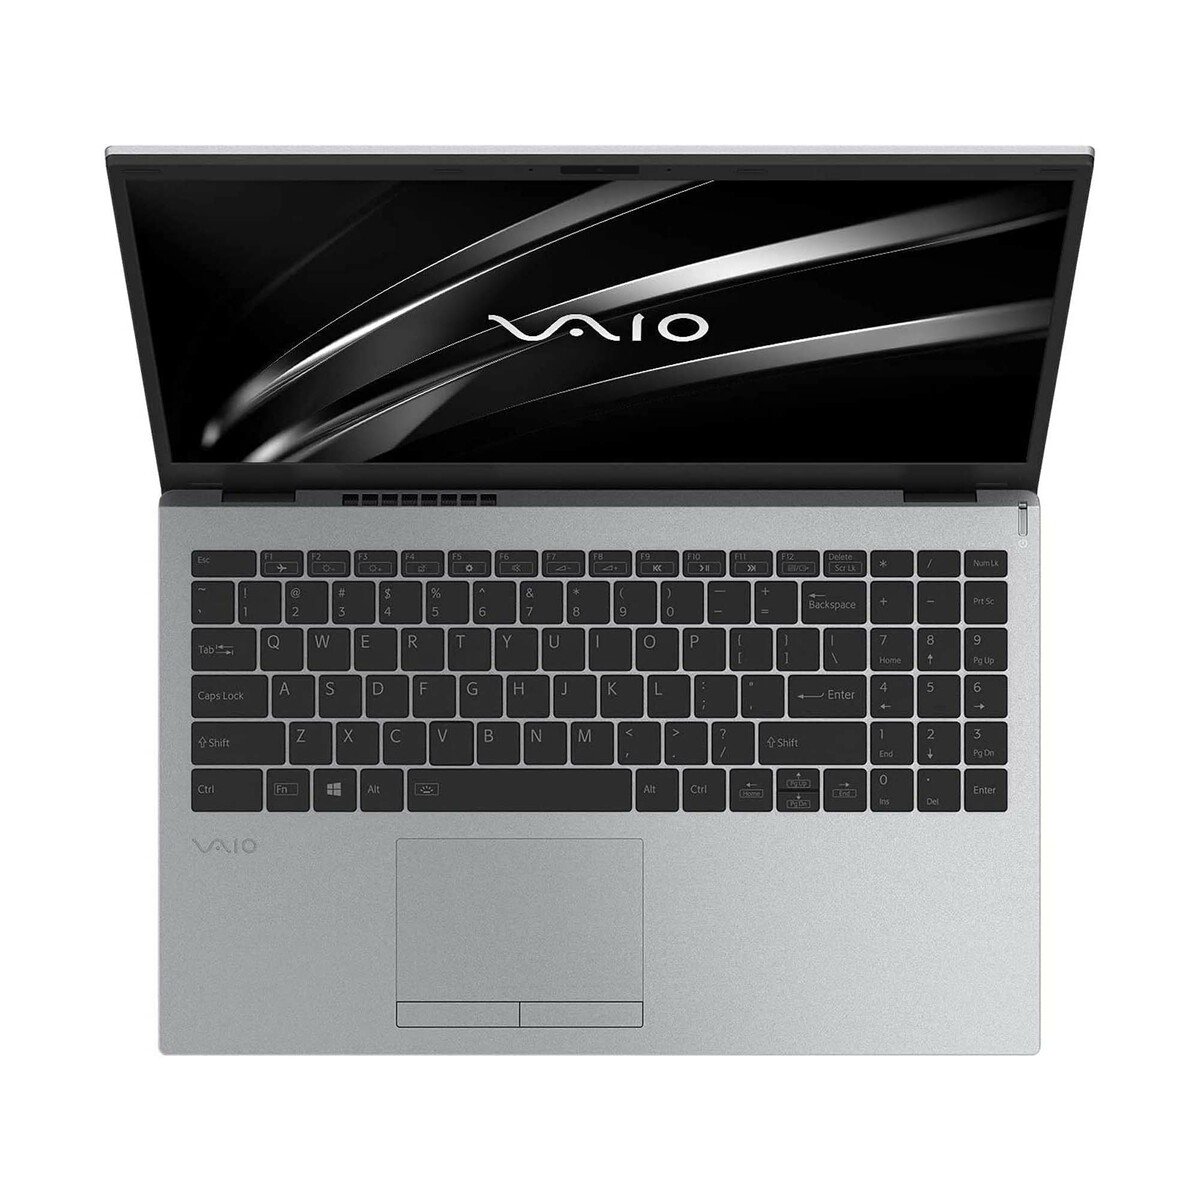 Vaio E15 NE15V2ME027P AMD R7-3700U Processor, 8GB RAM, 512GB SSD, Shared Graphics, 15.6inch FHD, Windows 10, Silver